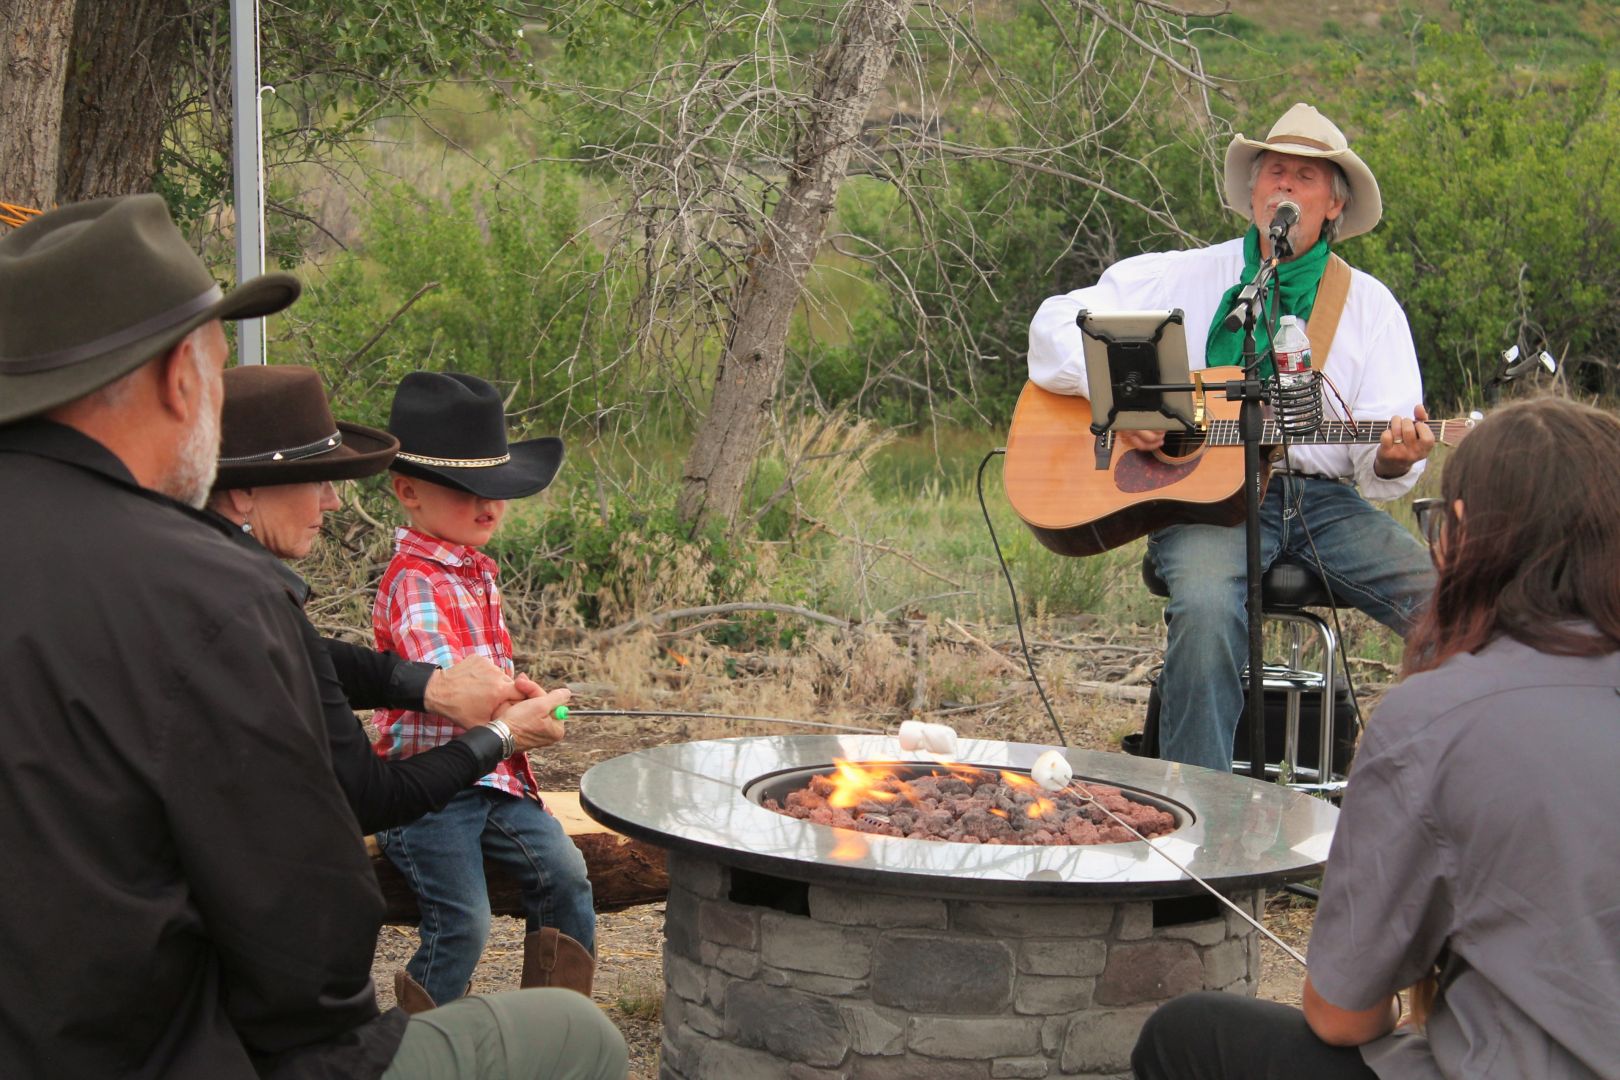 Cowboy playing a guitar and singing a song around a campfire